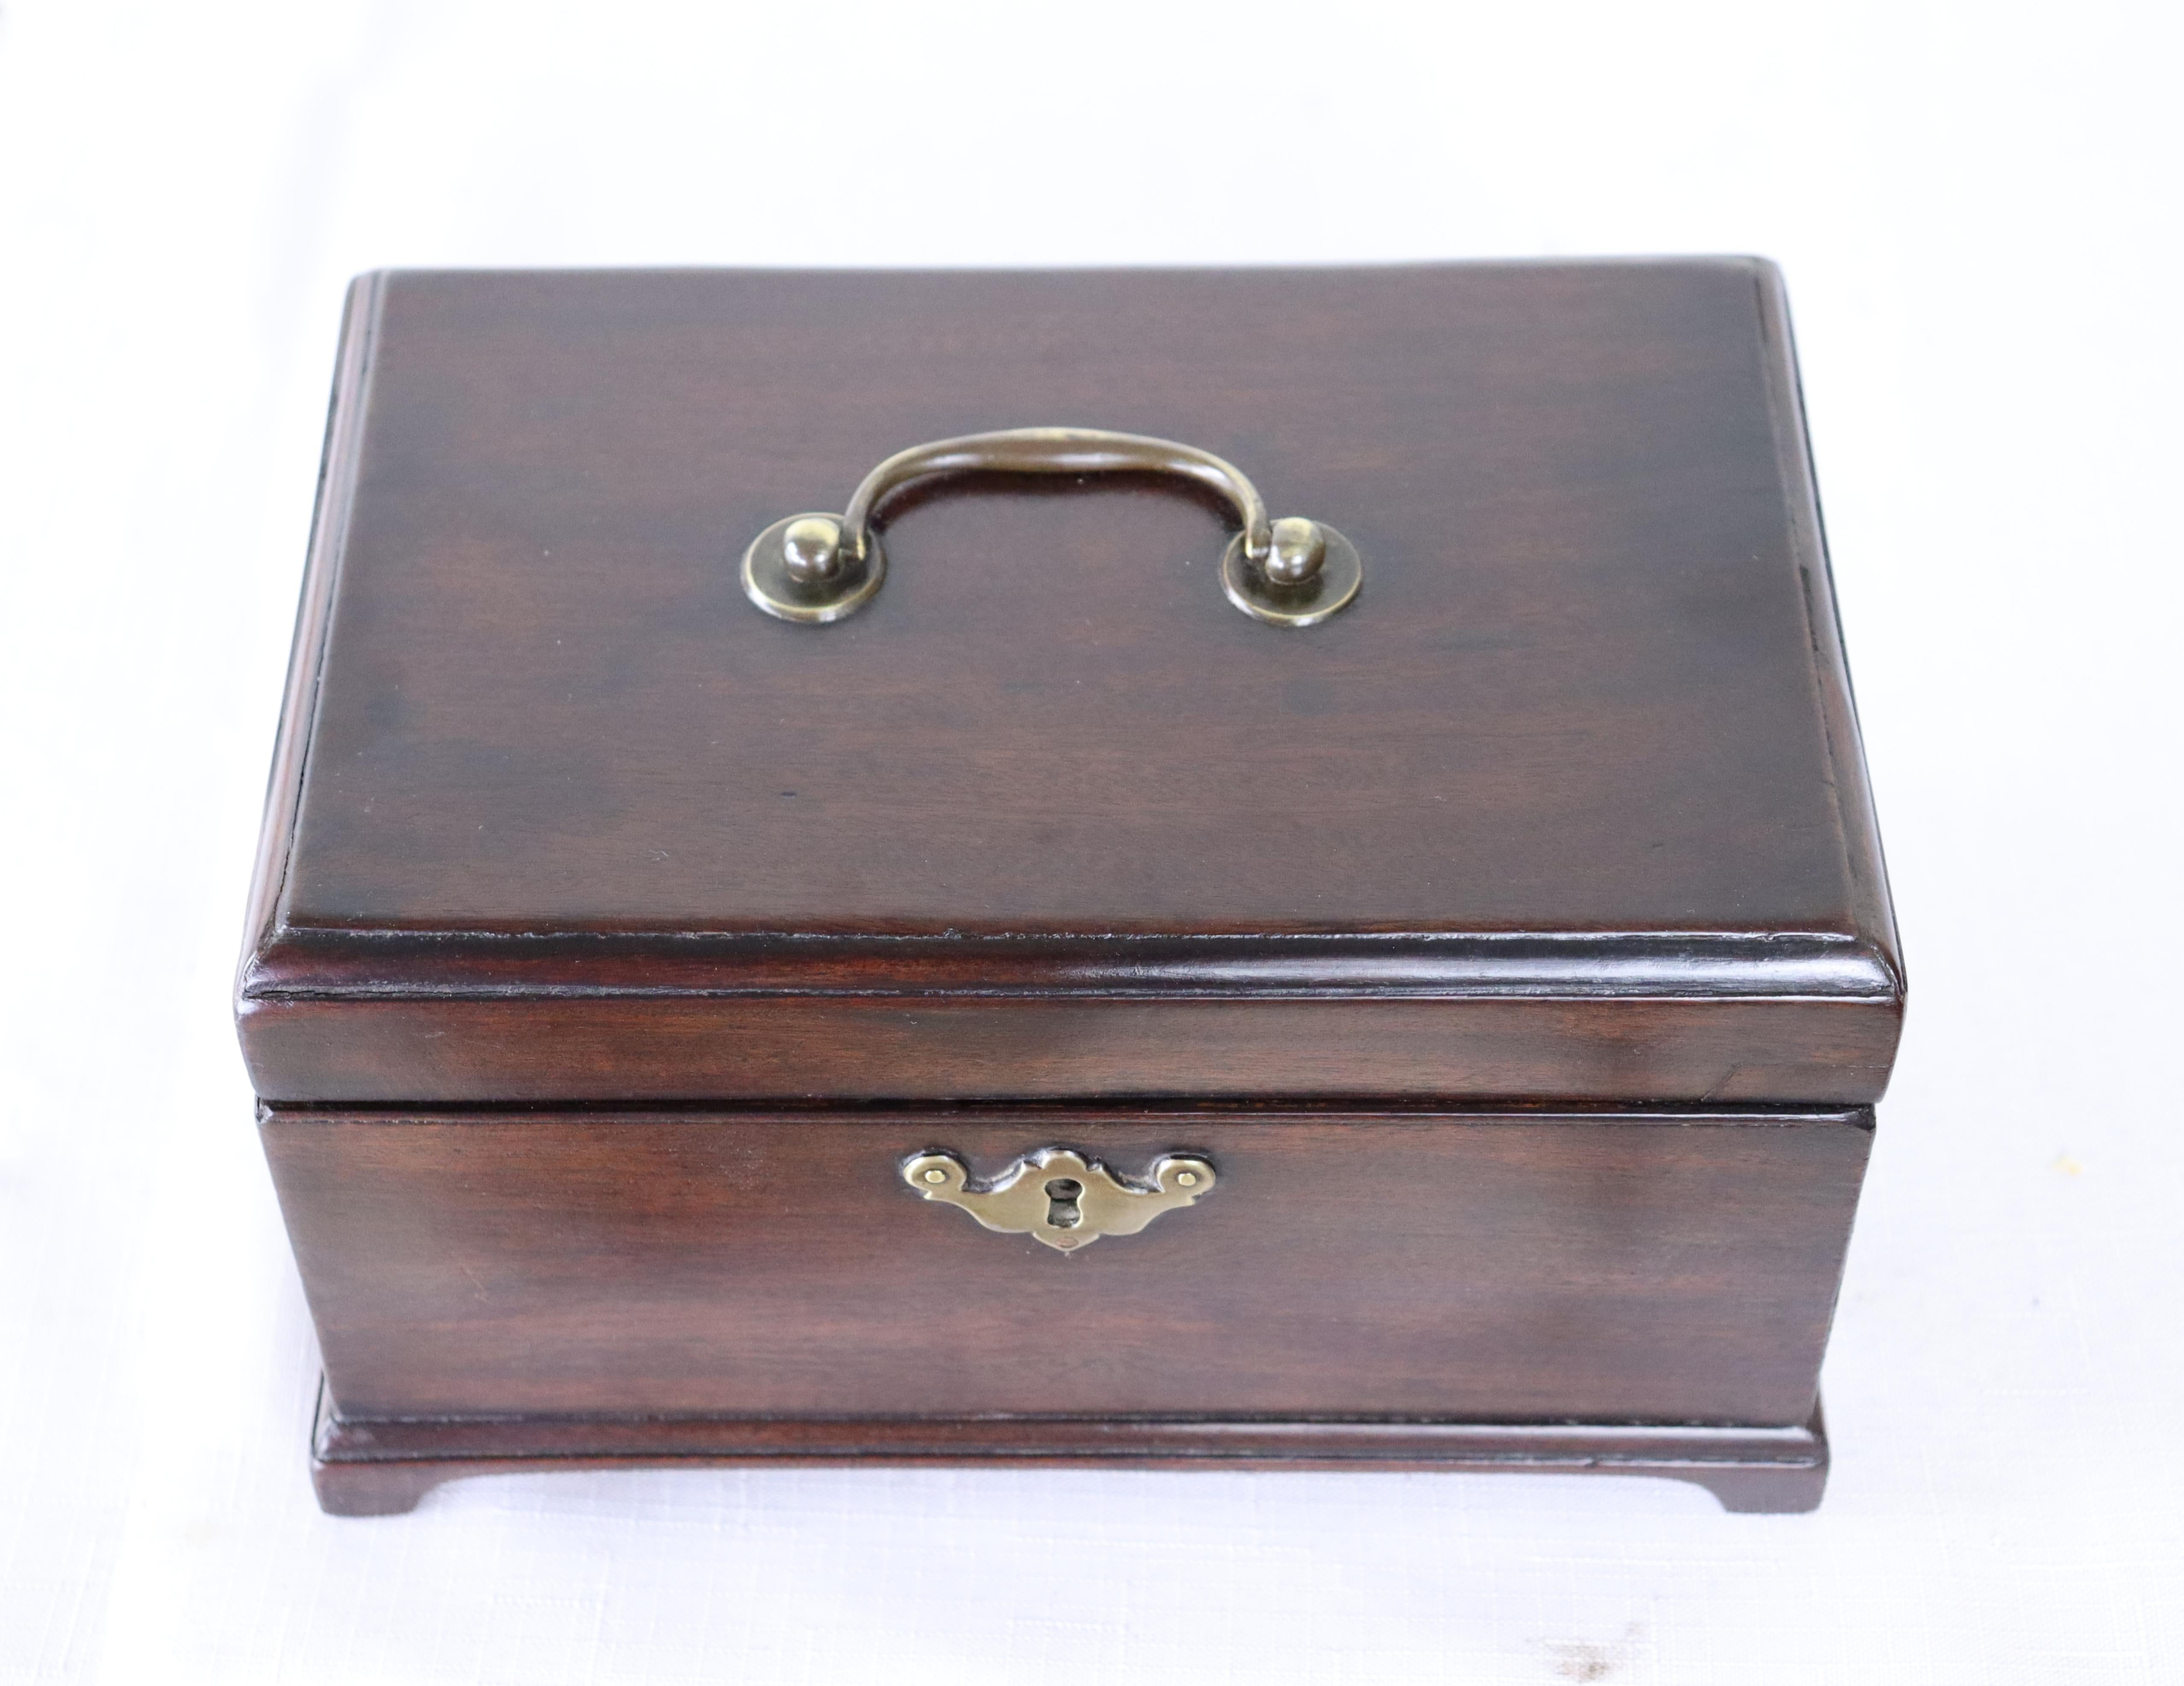 A splendid early mahogany tea caddy on charming shaped feet, circa 1770. Good color and patina and in very nice antique condition. No key.